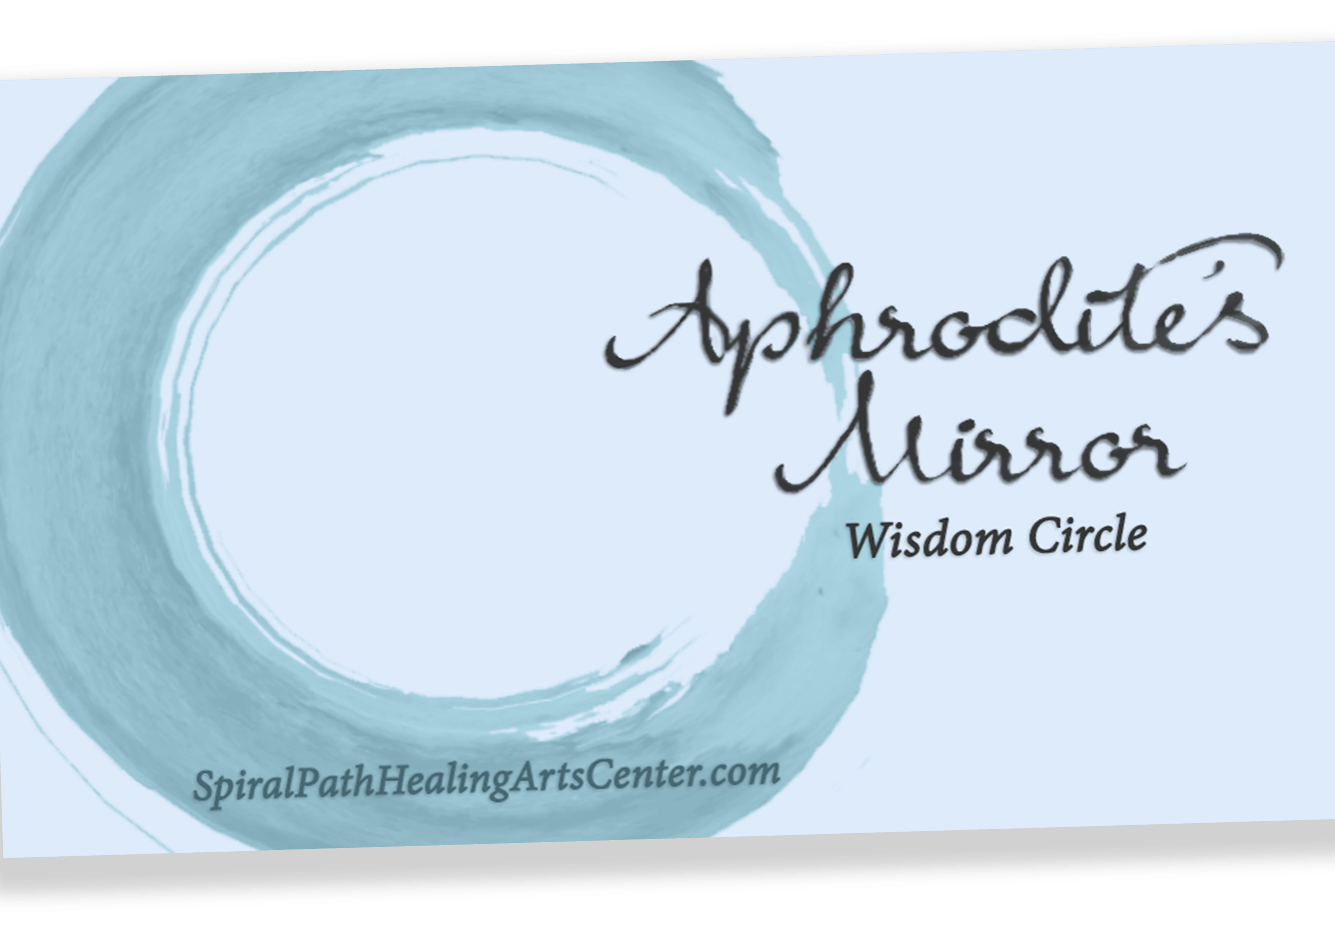 Business Card for SpiralPathHealingArtsCenter.com. On the business card is a teal-colored painted circle with the words "Aphrodite's Mirror Wisdom Circle" next to it.